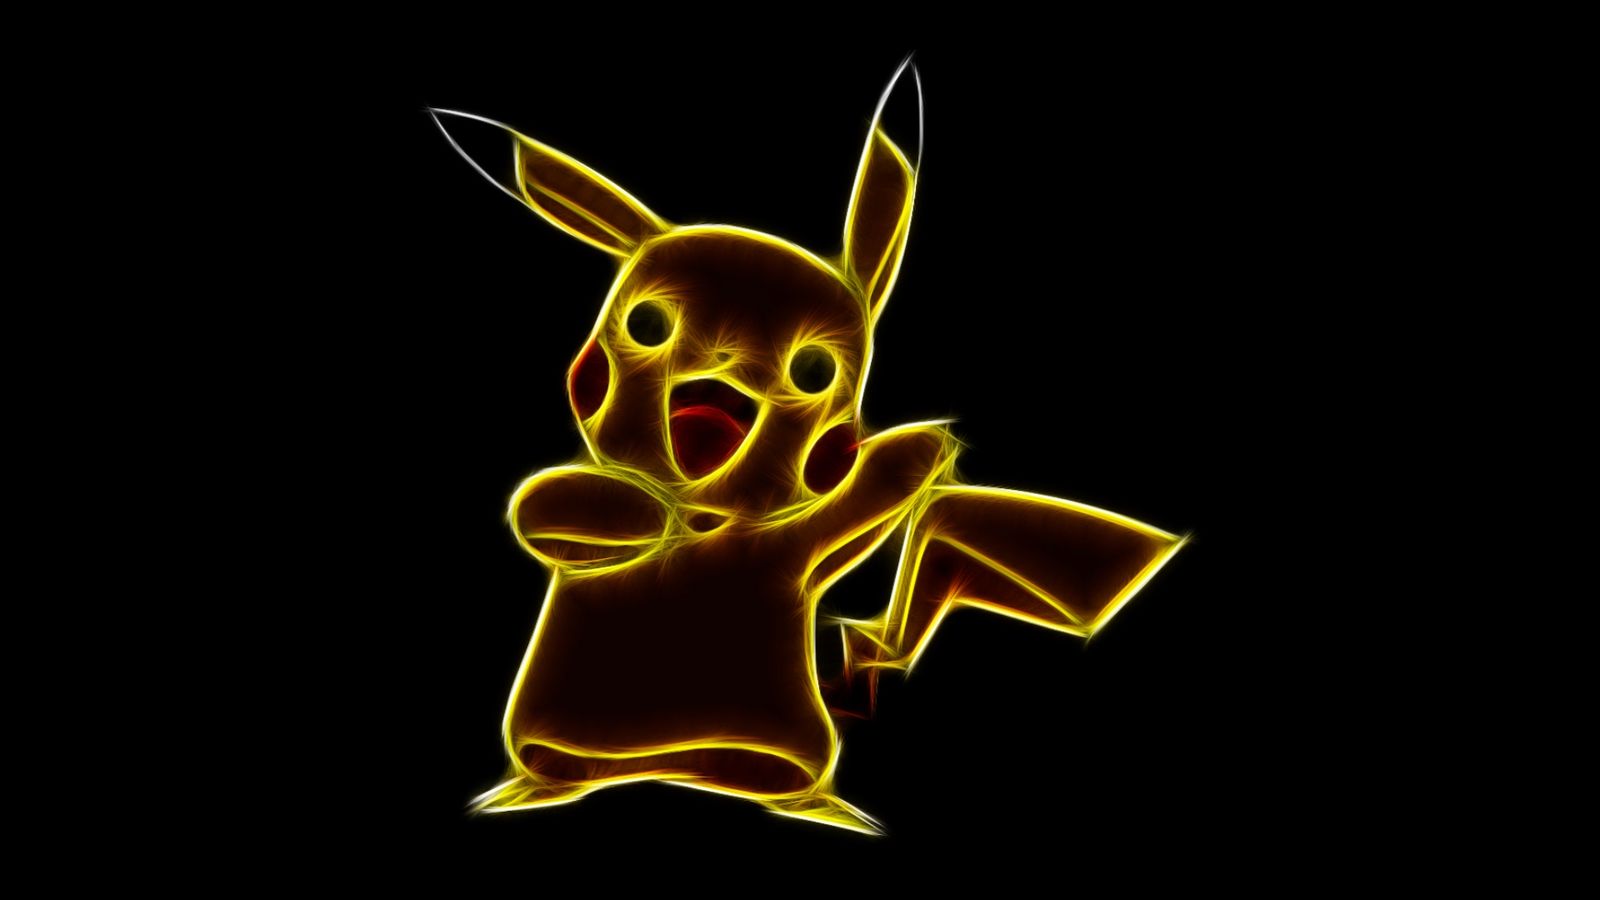 Pikachu Wallpaper Picture Image For Your